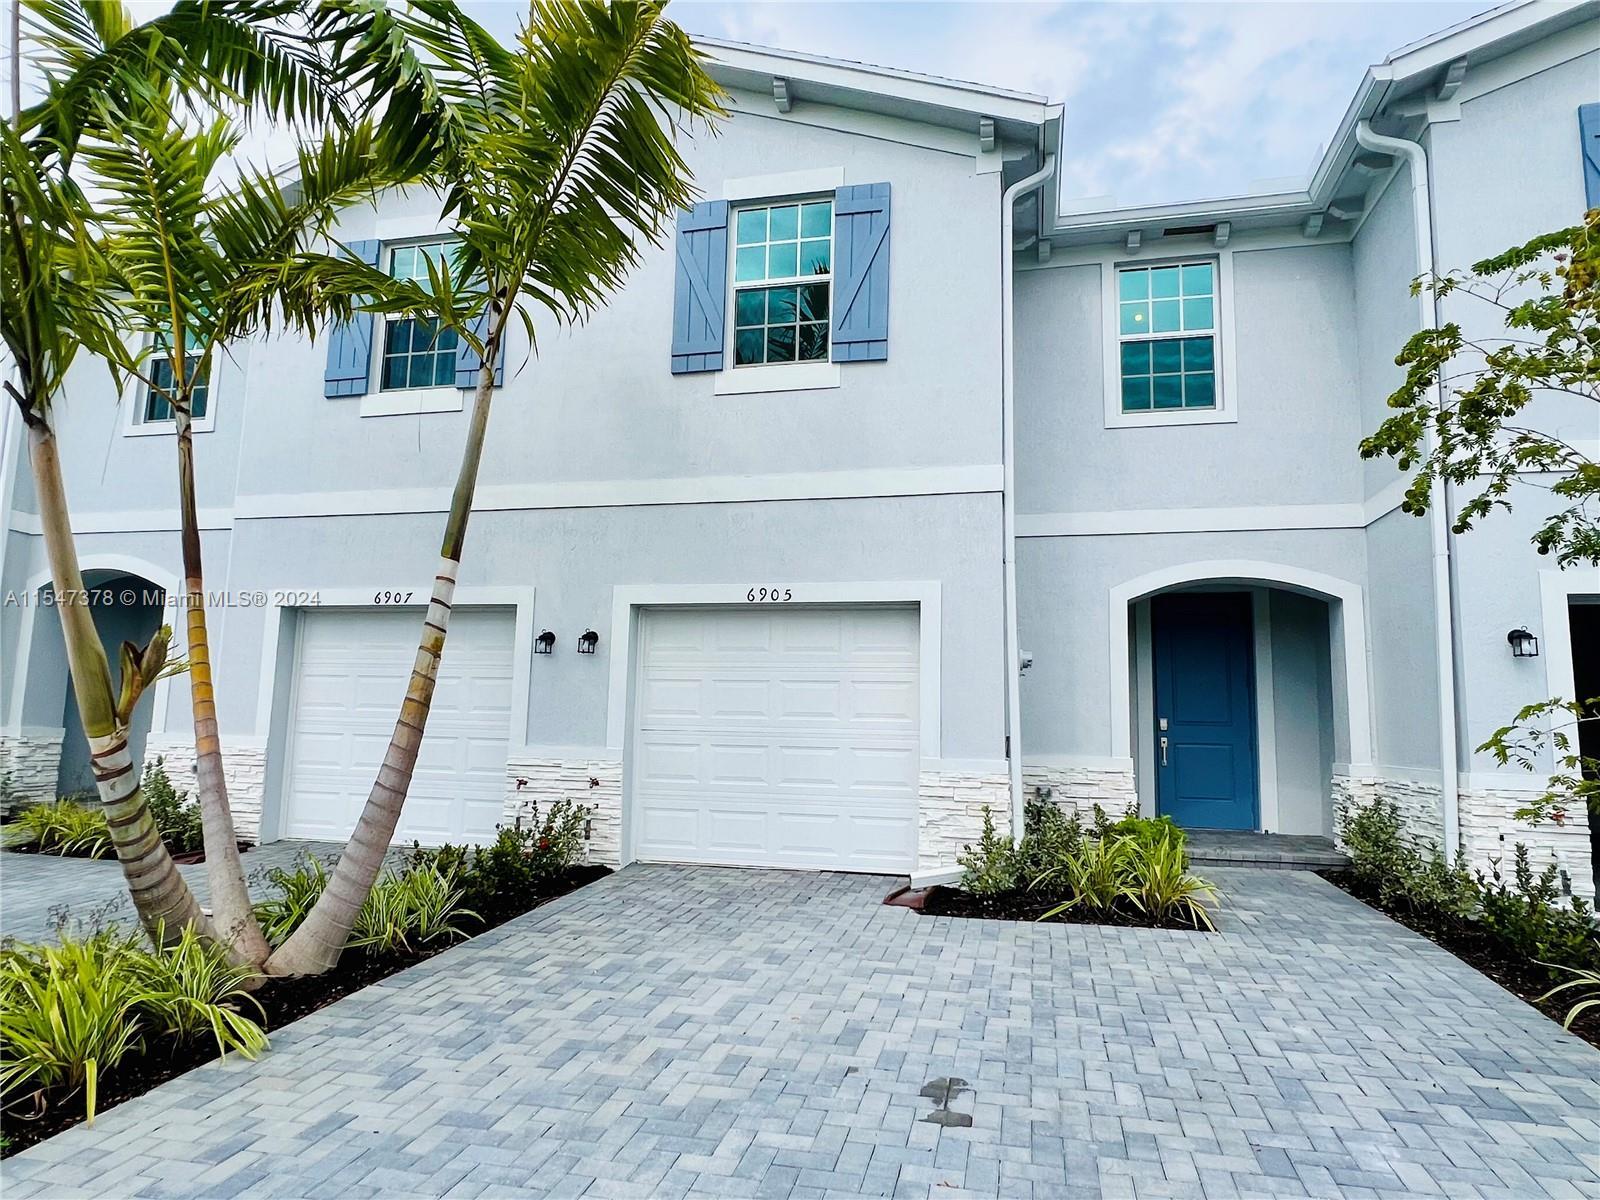 Photo of 6905 Harbours Edge Ave in Lake Worth, FL